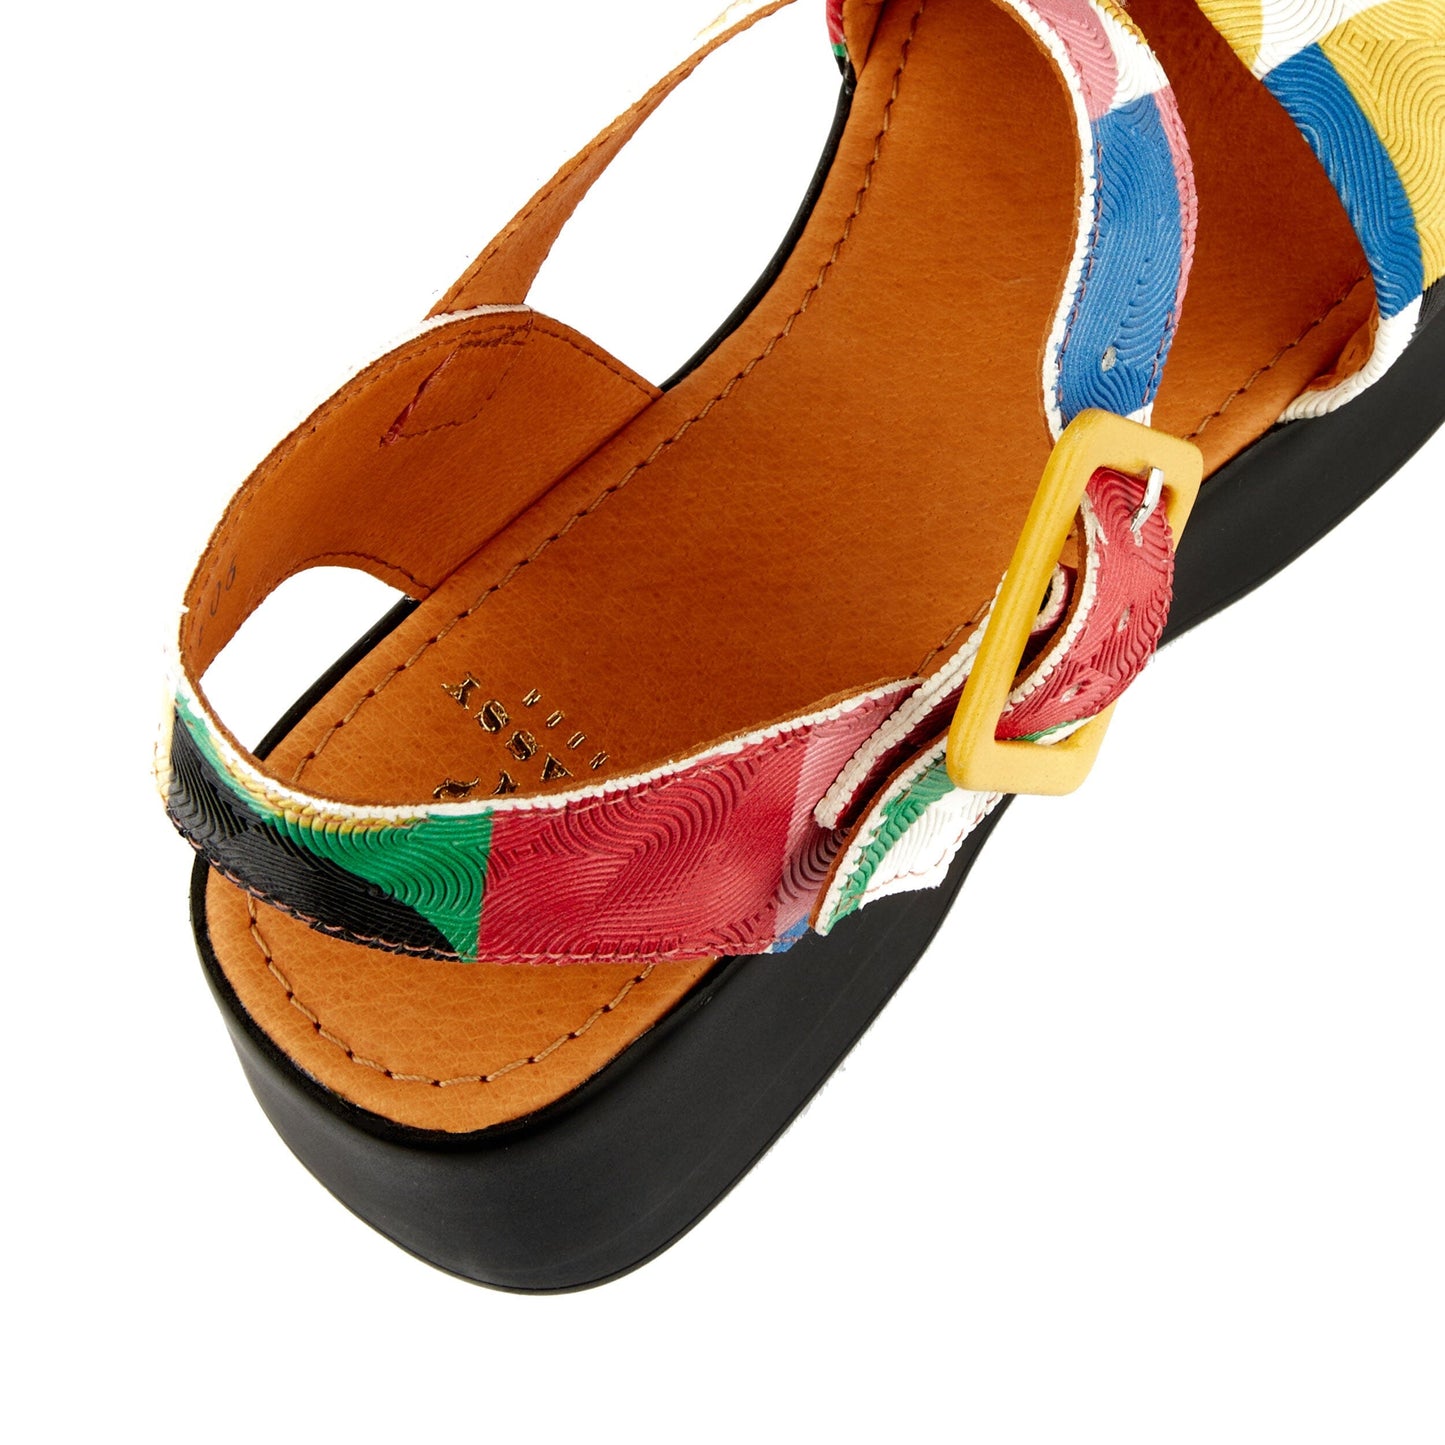 Stacey - Groovy Womens Sandals Embassy London 